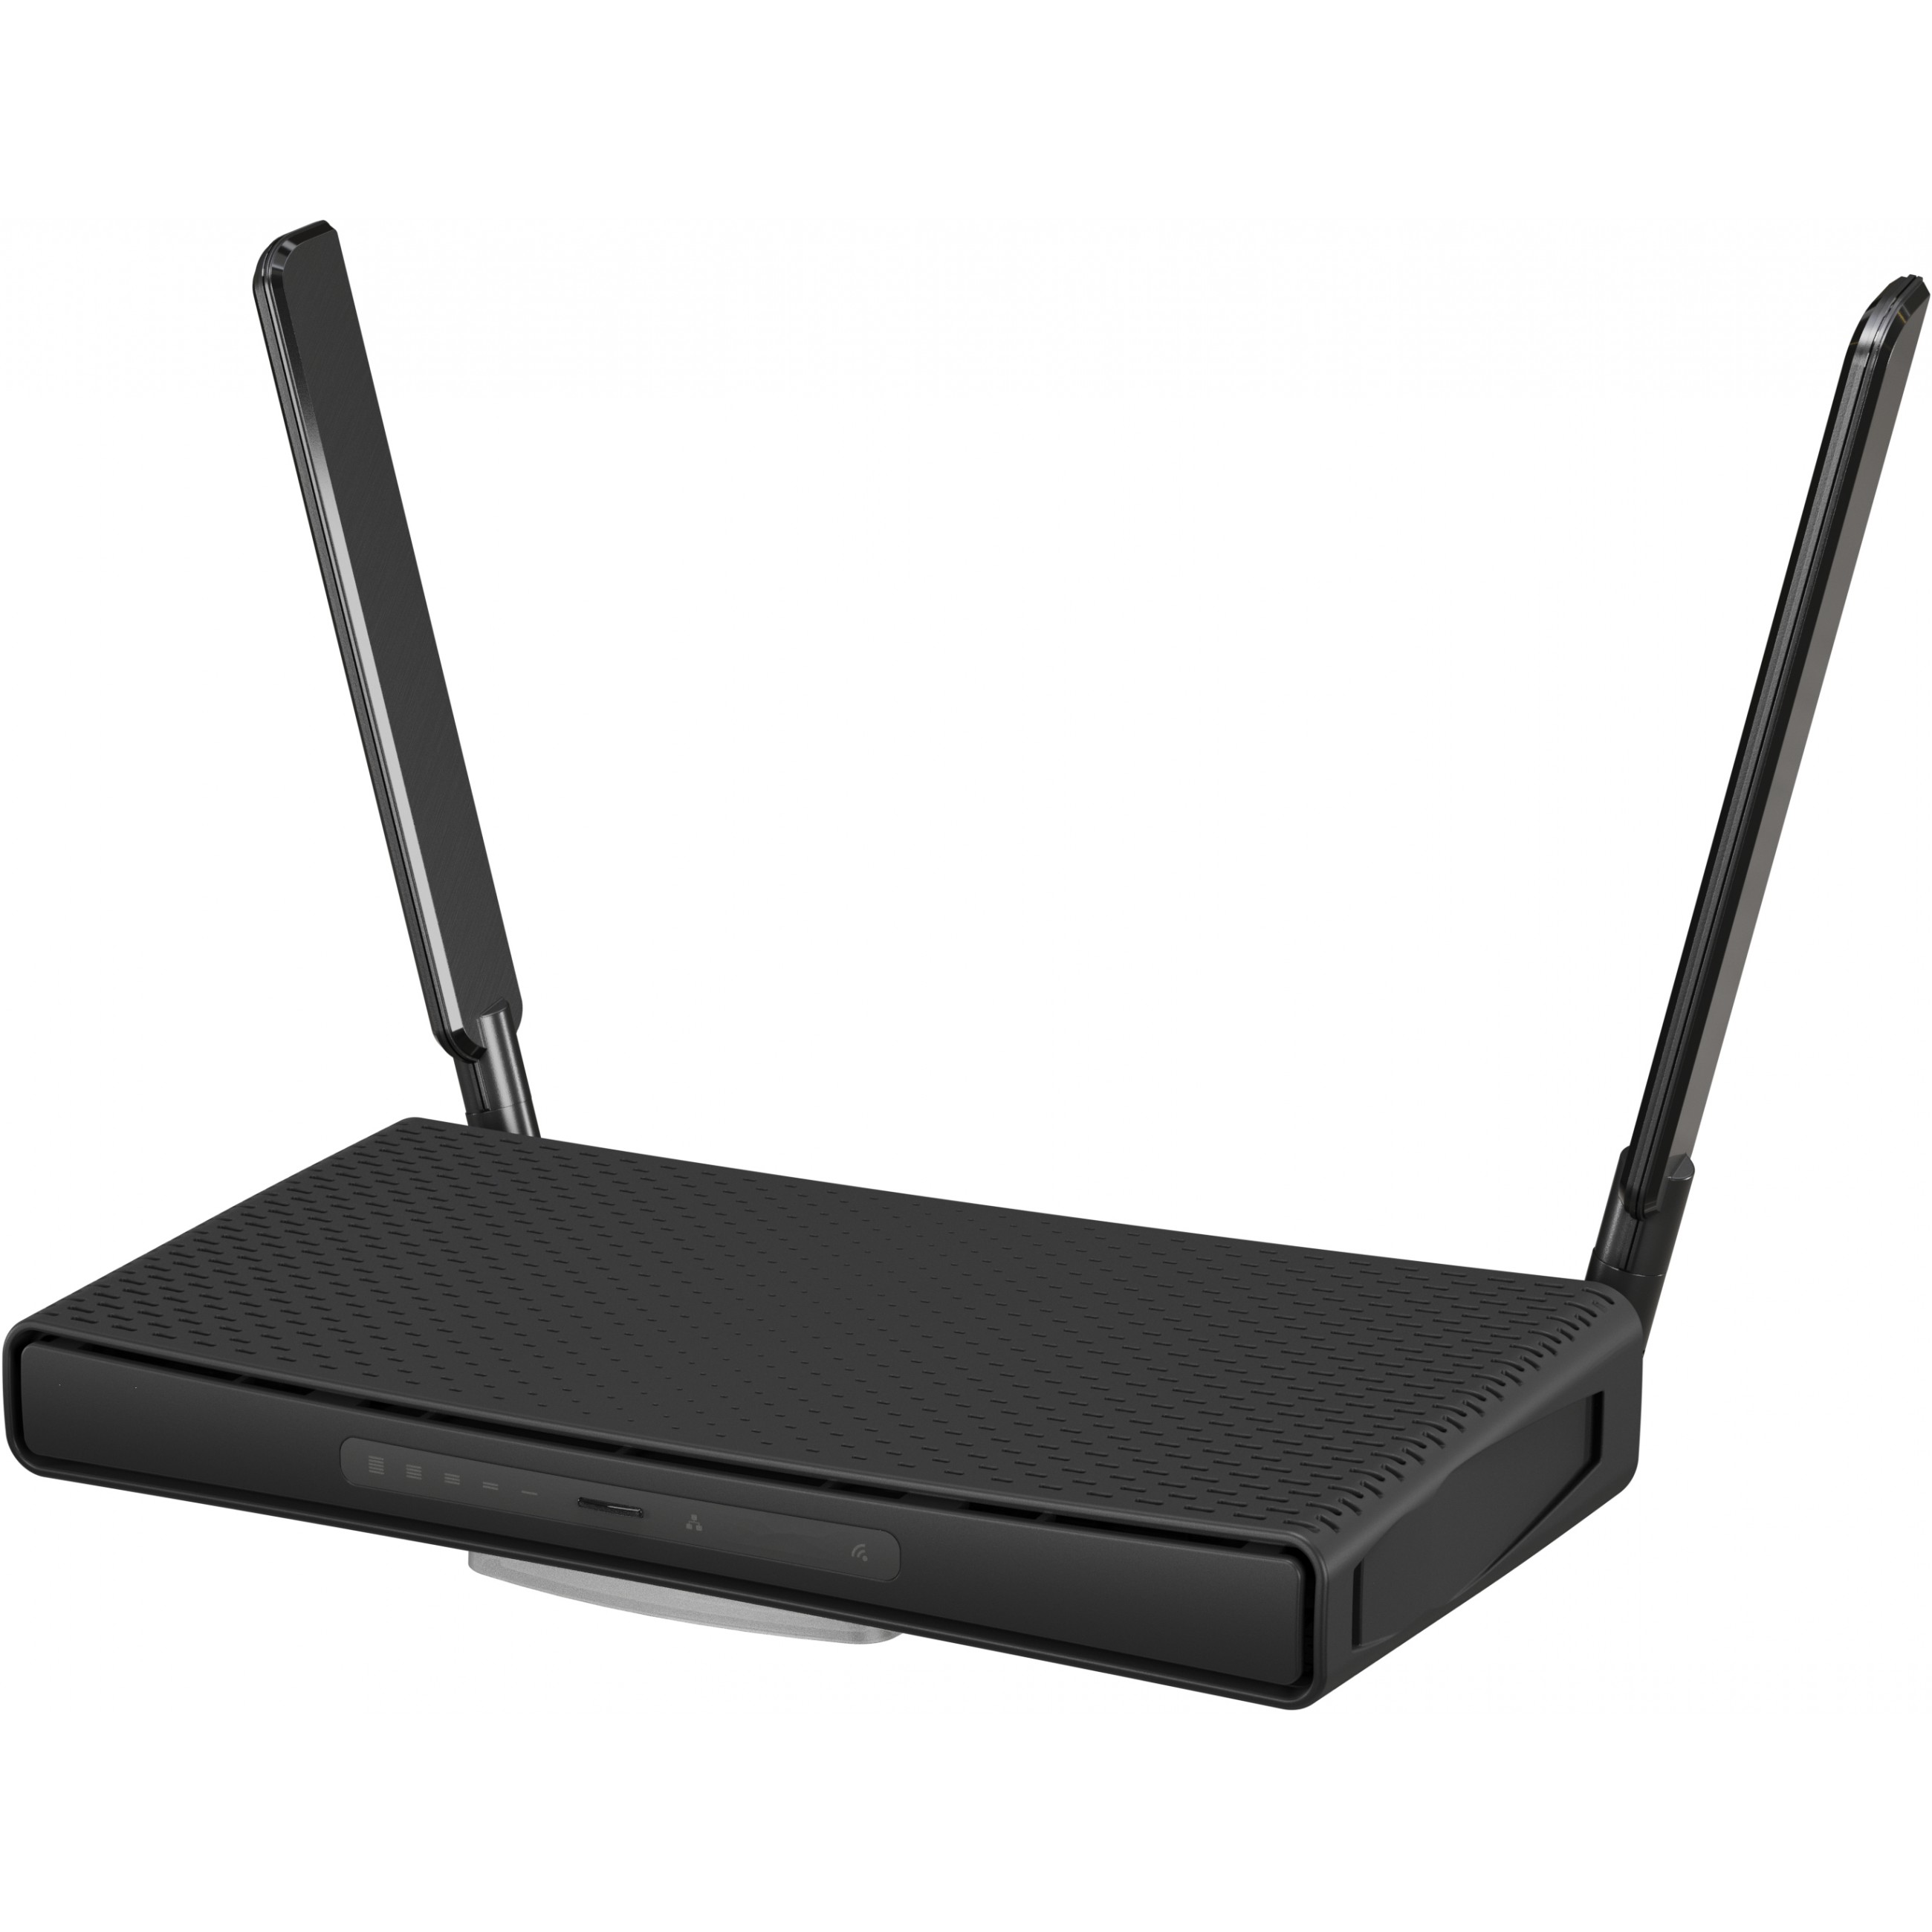 Mikrotik hAP ax³ wireless router - C53UIG+5HPAXD2HPAXD